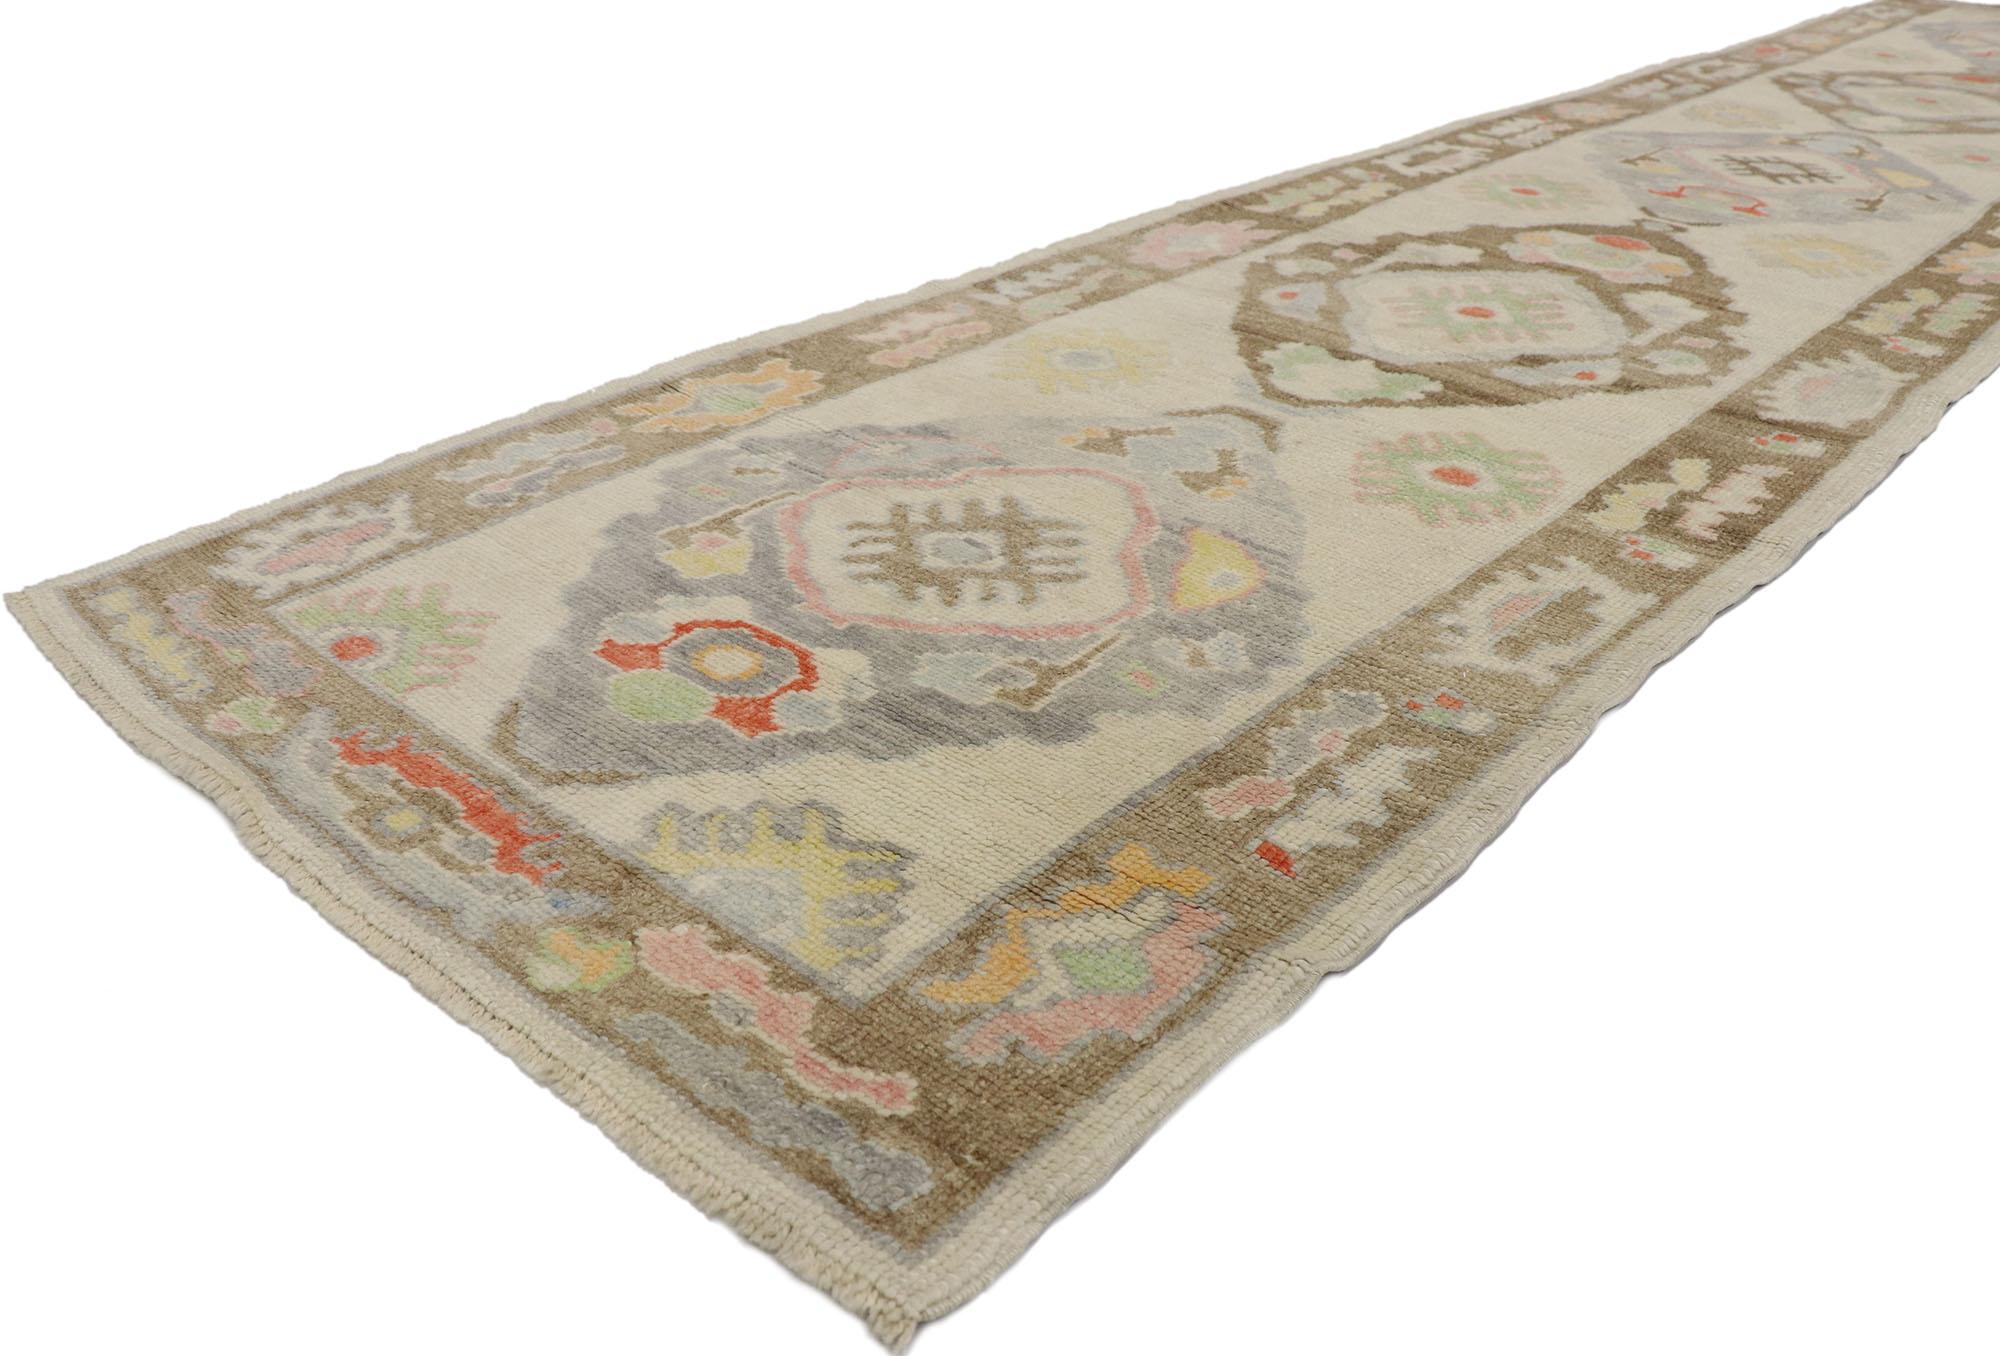 53592 new contemporary Turkish Oushak Runner 03'01 x 15'00. Warm and inviting with a splash of soft colors, this hand-knotted wool contemporary Turkish Oushak runner beautifully embodies bohemian style. The abrashed light gray field features an